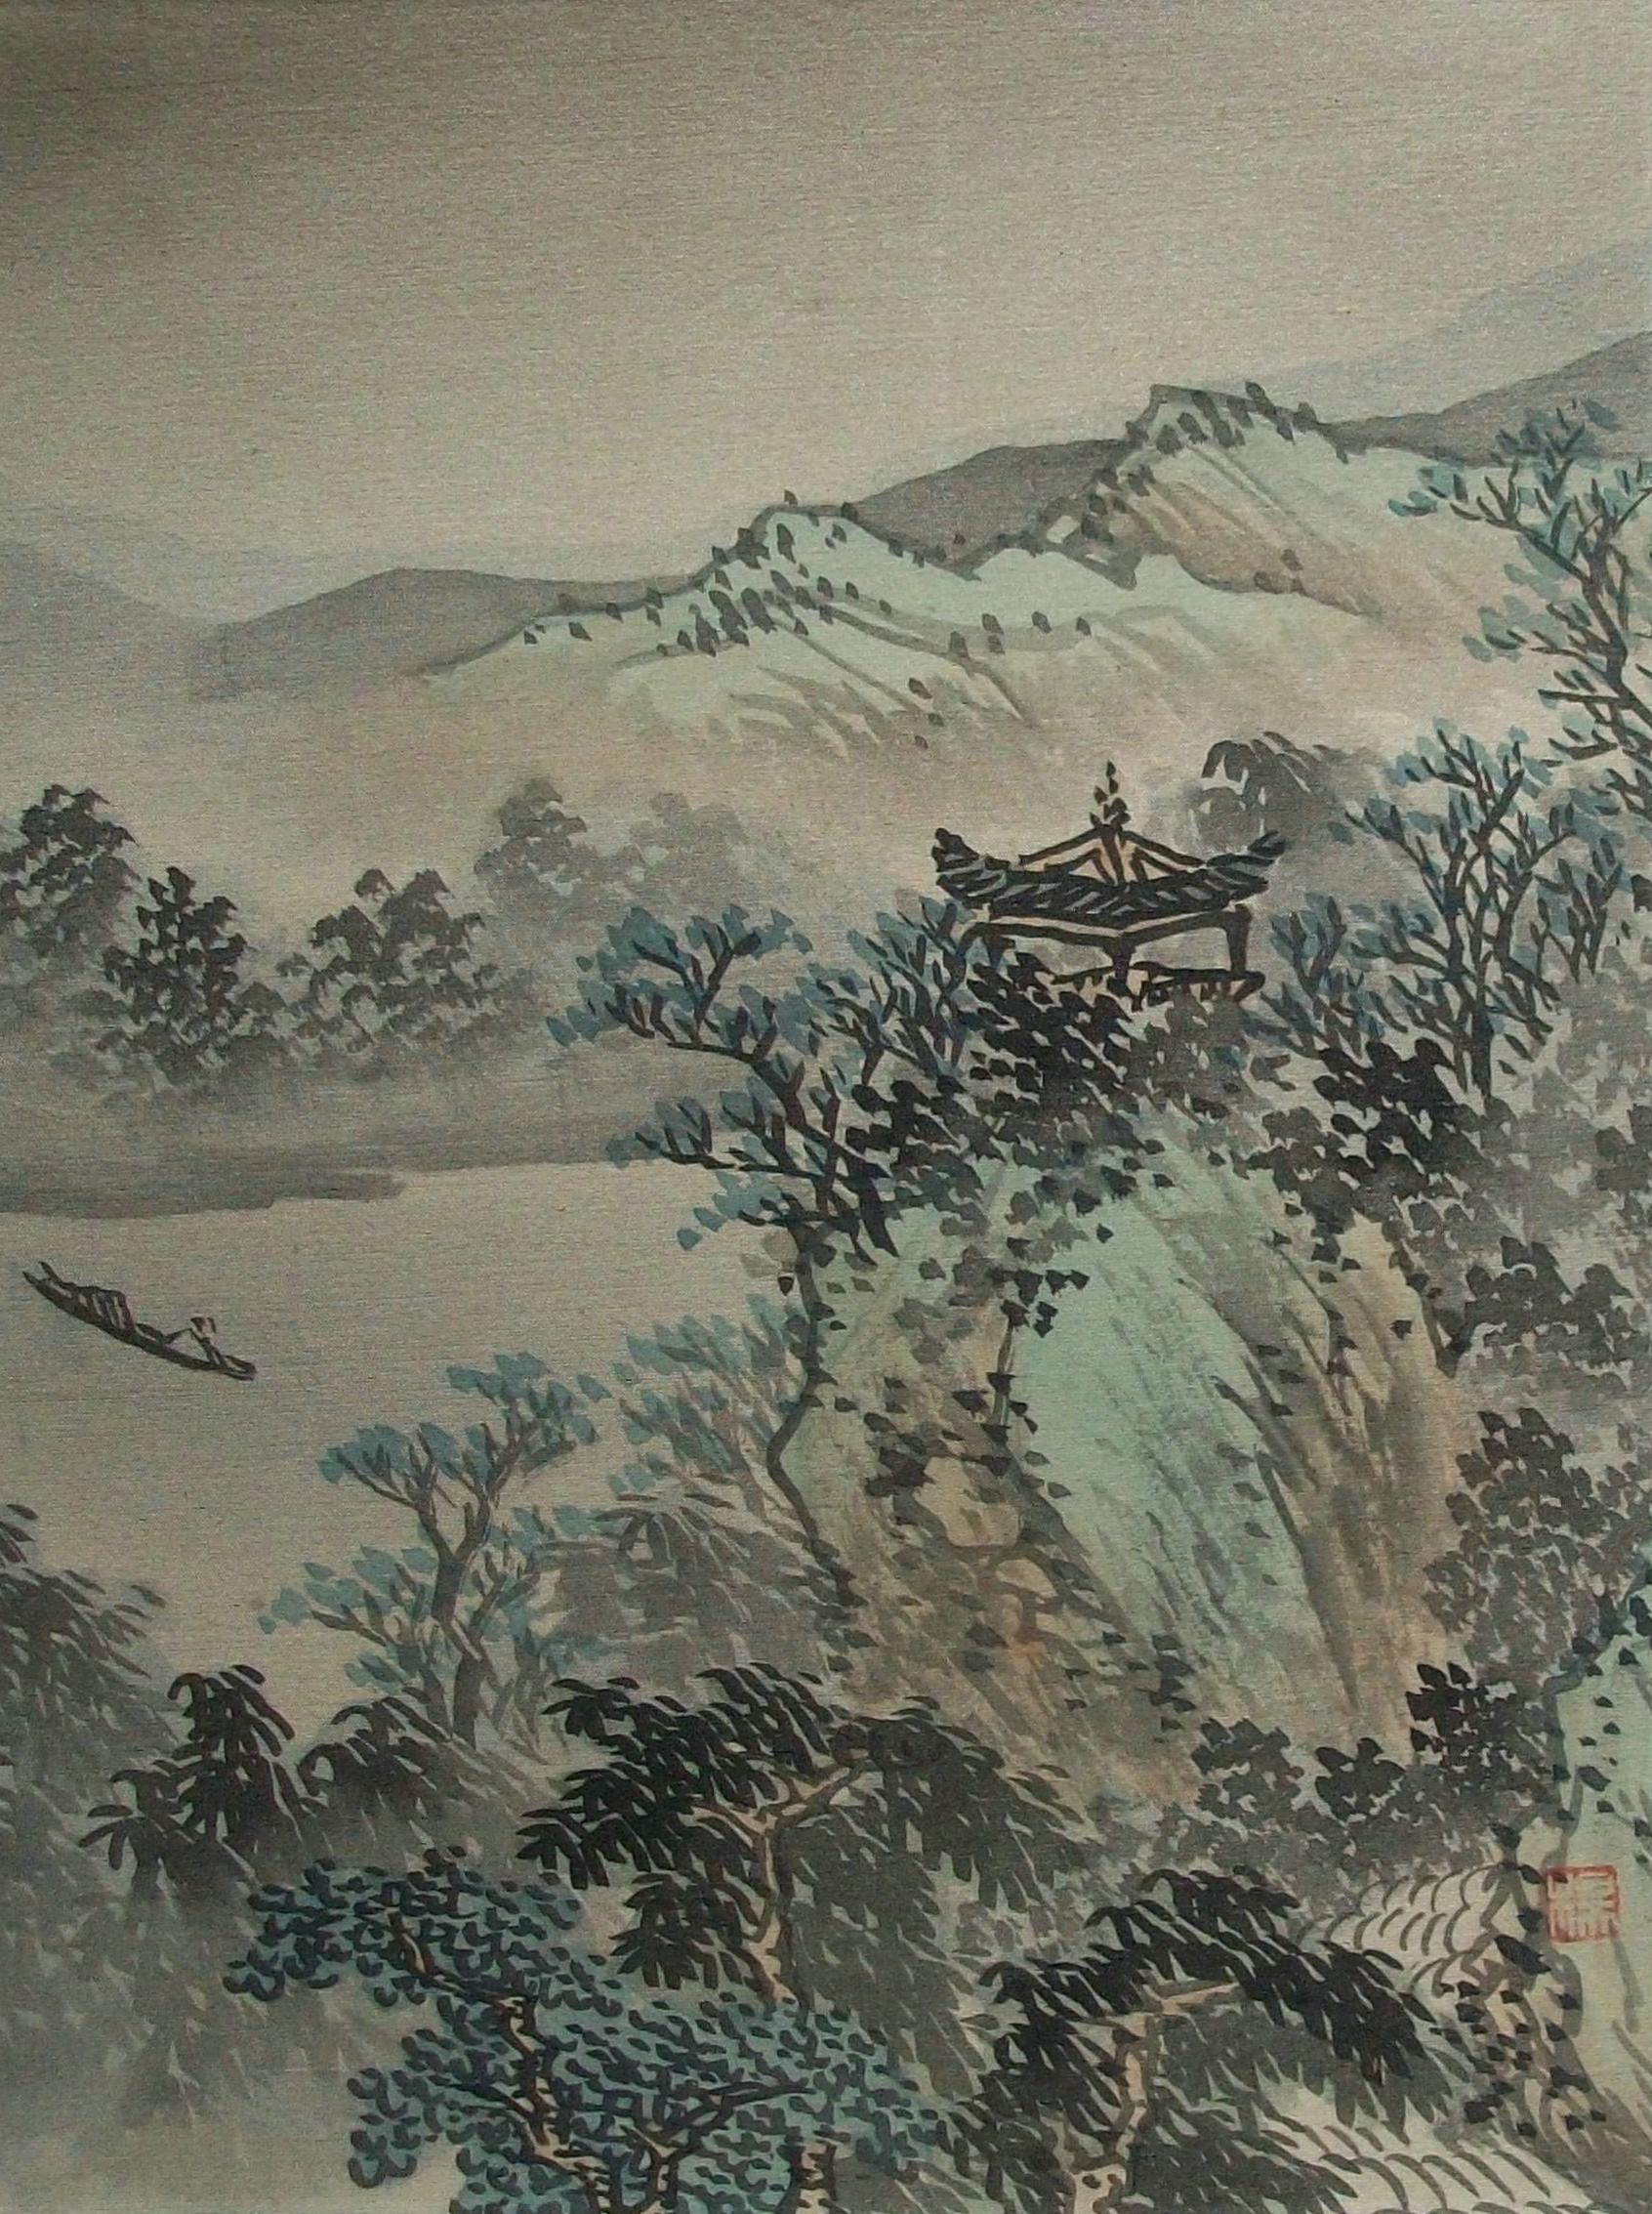 Vintage traditional style watercolor and ink landscape painting on silk (applied to paper backing) - hand painted - silk damask textile border - signed with a red seal lower right (unidentified artist) - China - late 20th century.

Excellent